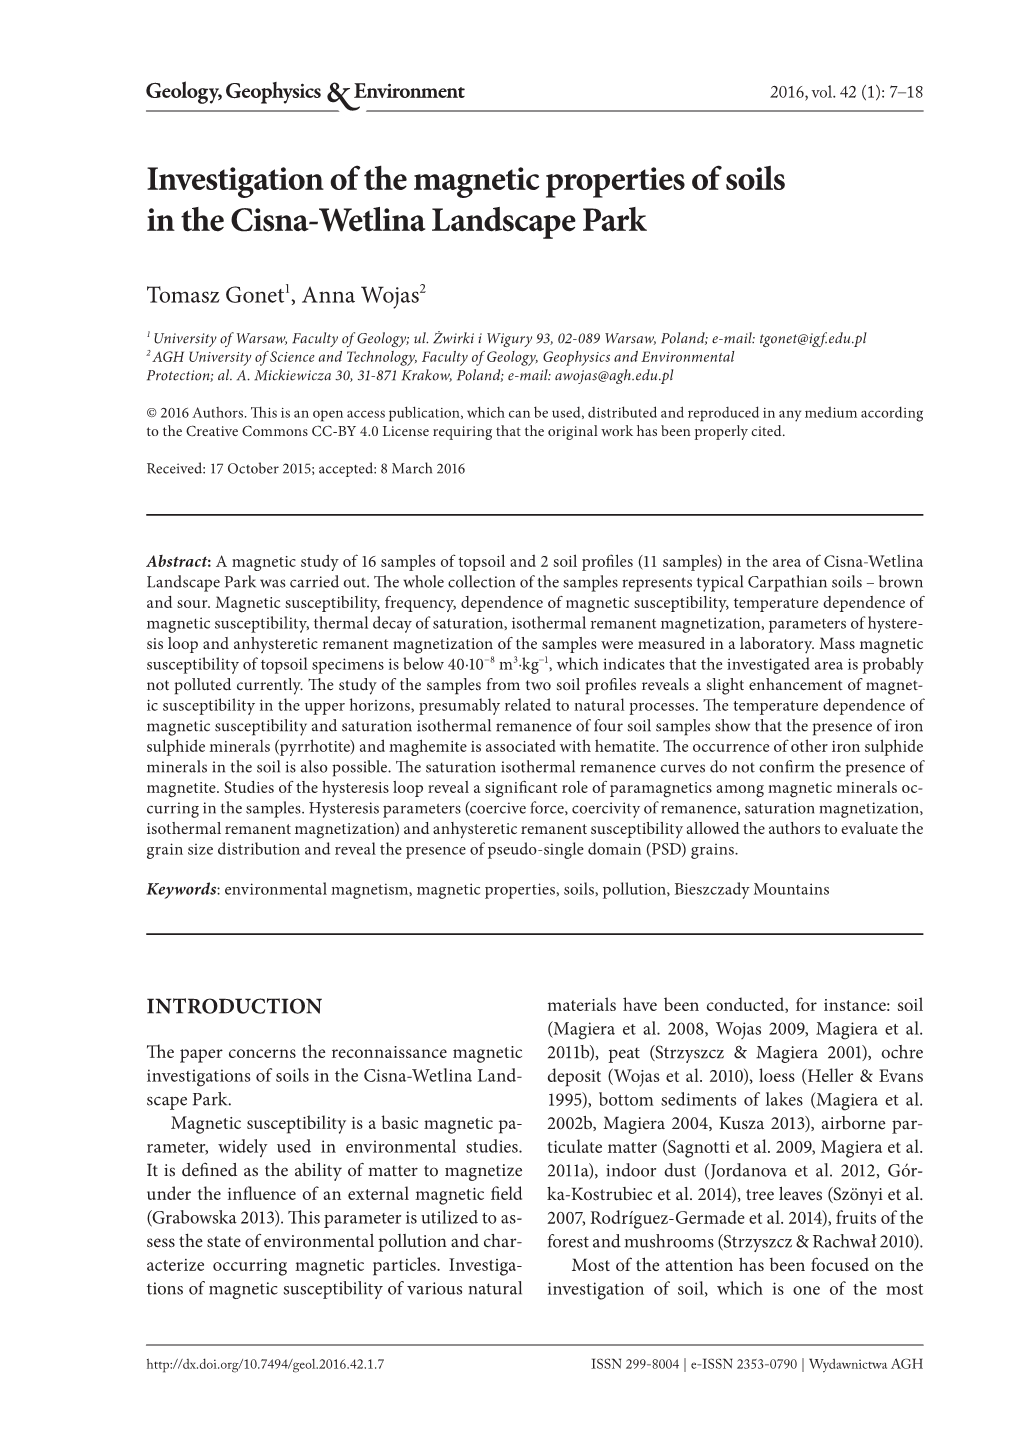 Investigation of the Magnetic Properties of Soils in the Cisna-Wetlina Landscape Park